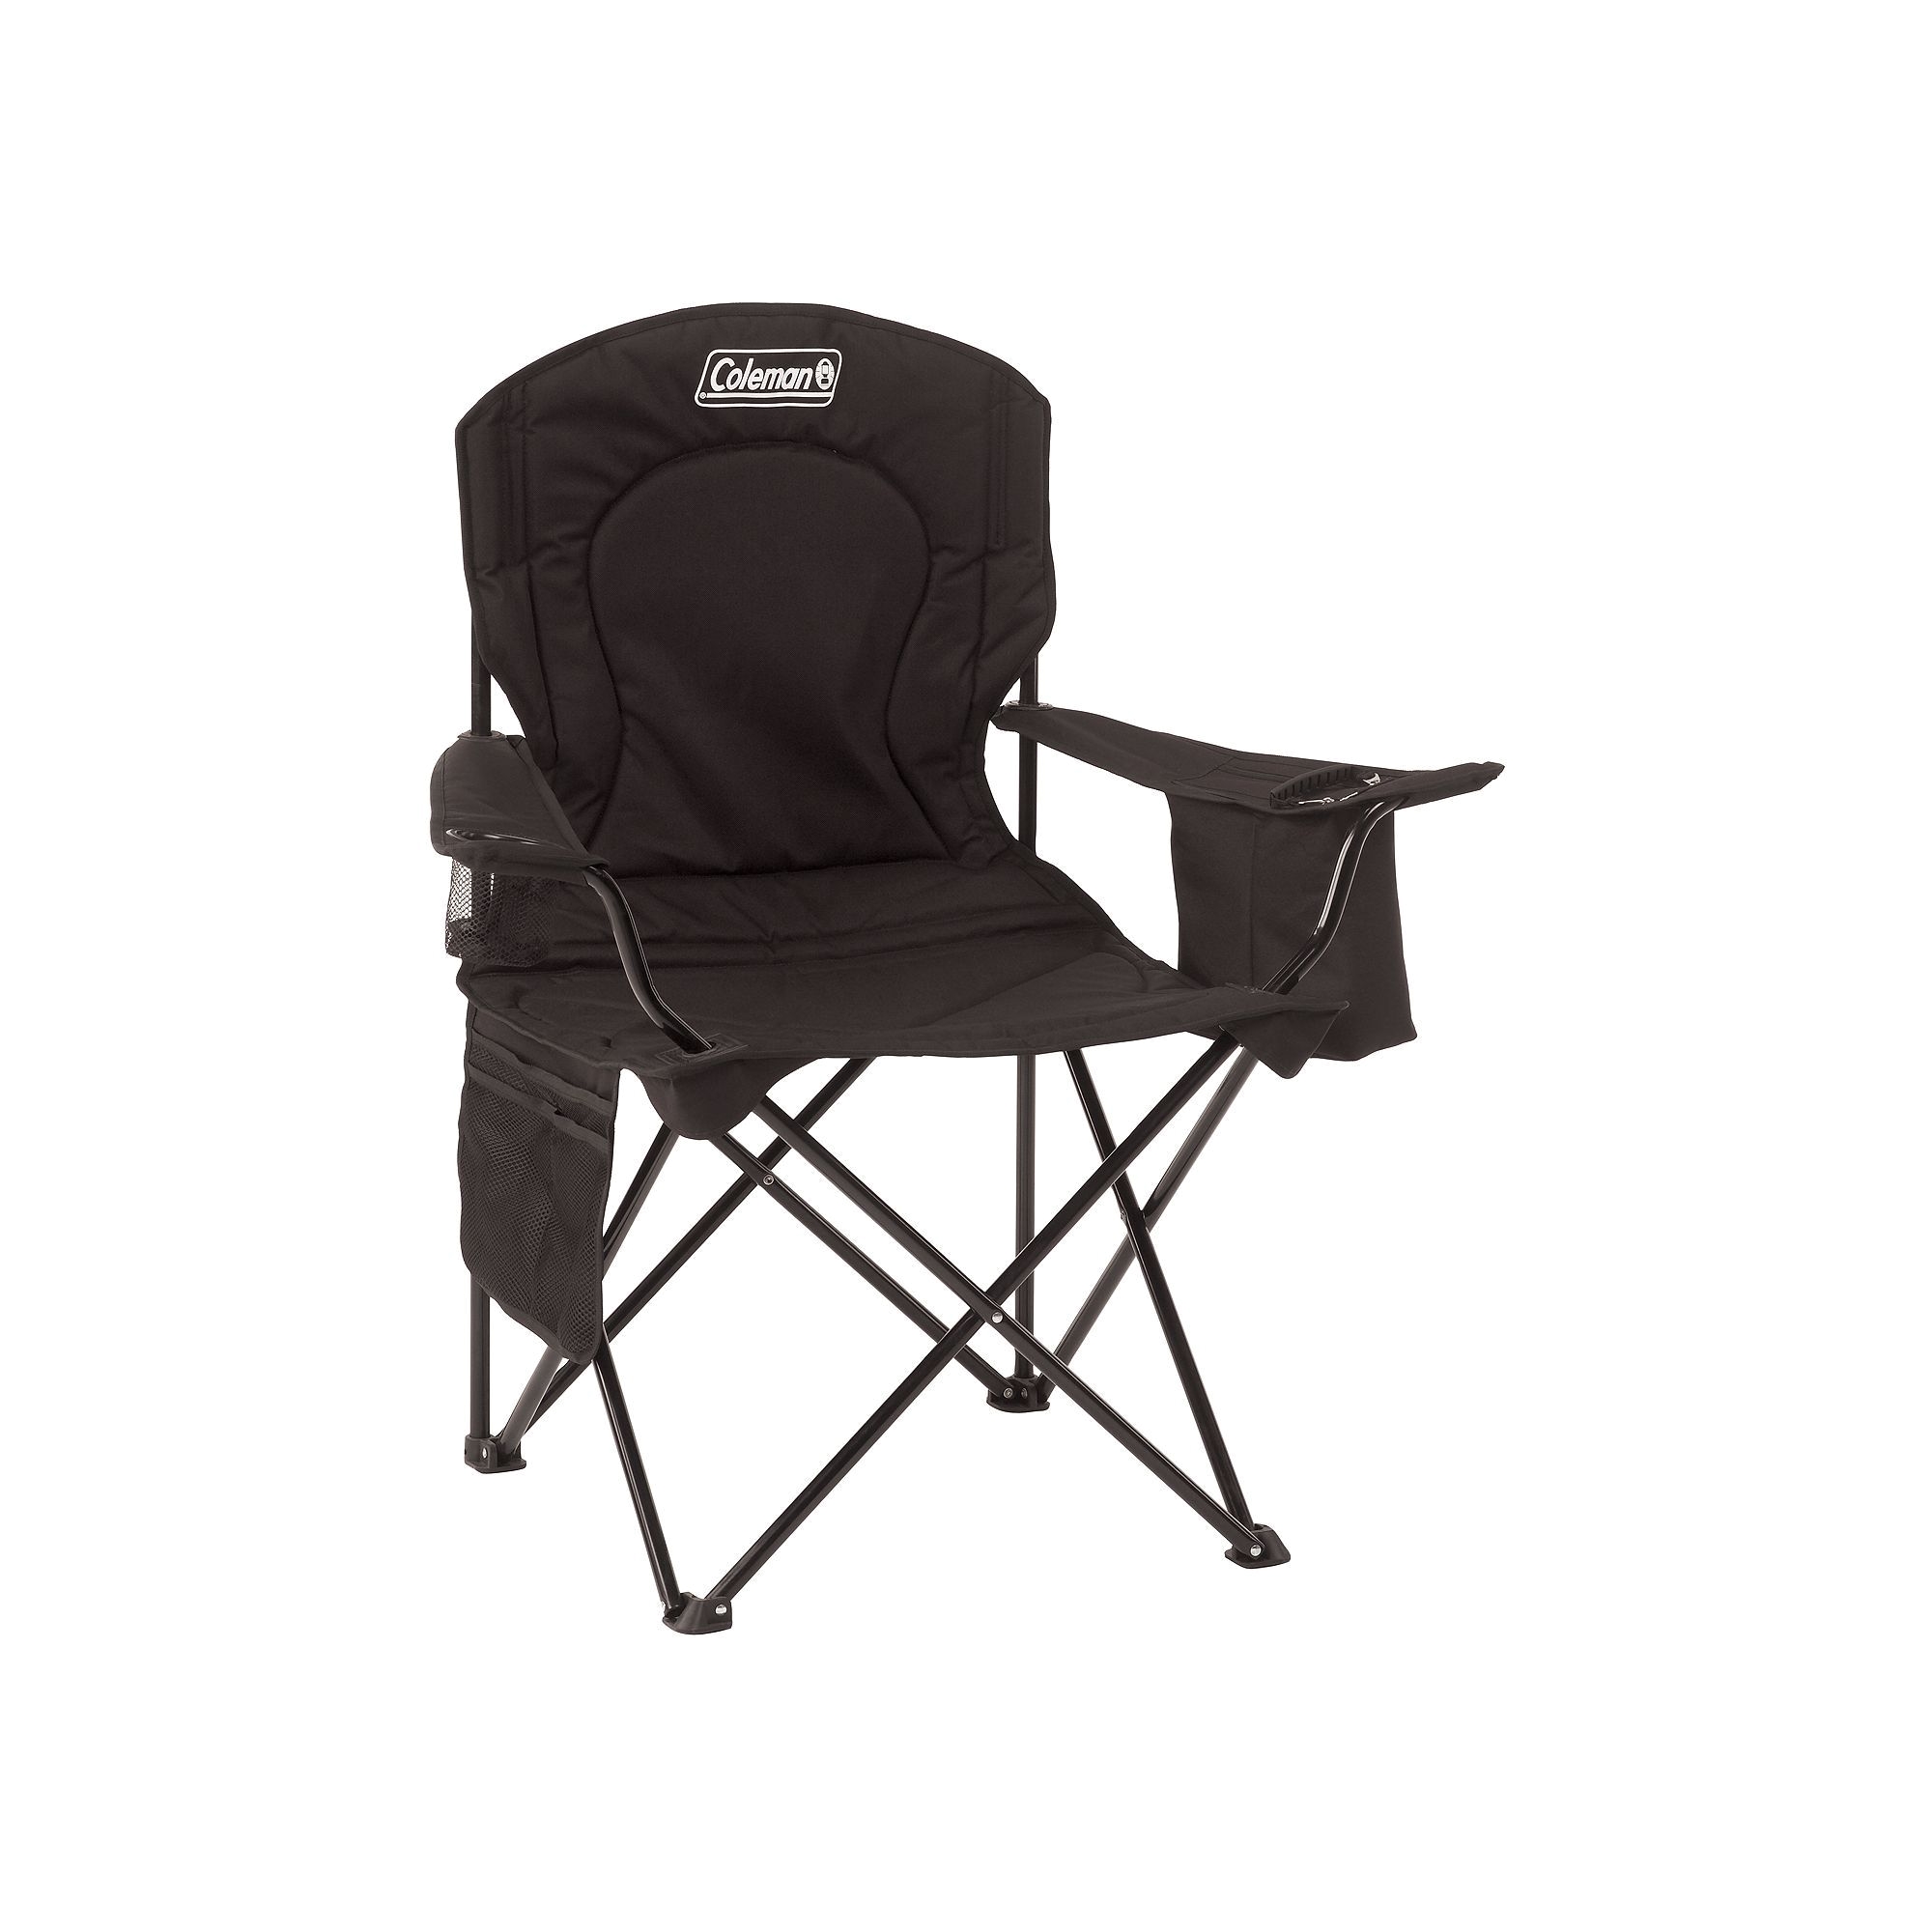 Extra Heavy Duty Beach Chairs Outdoor Coleman Oversize Quad Chair with Cooler Red Products